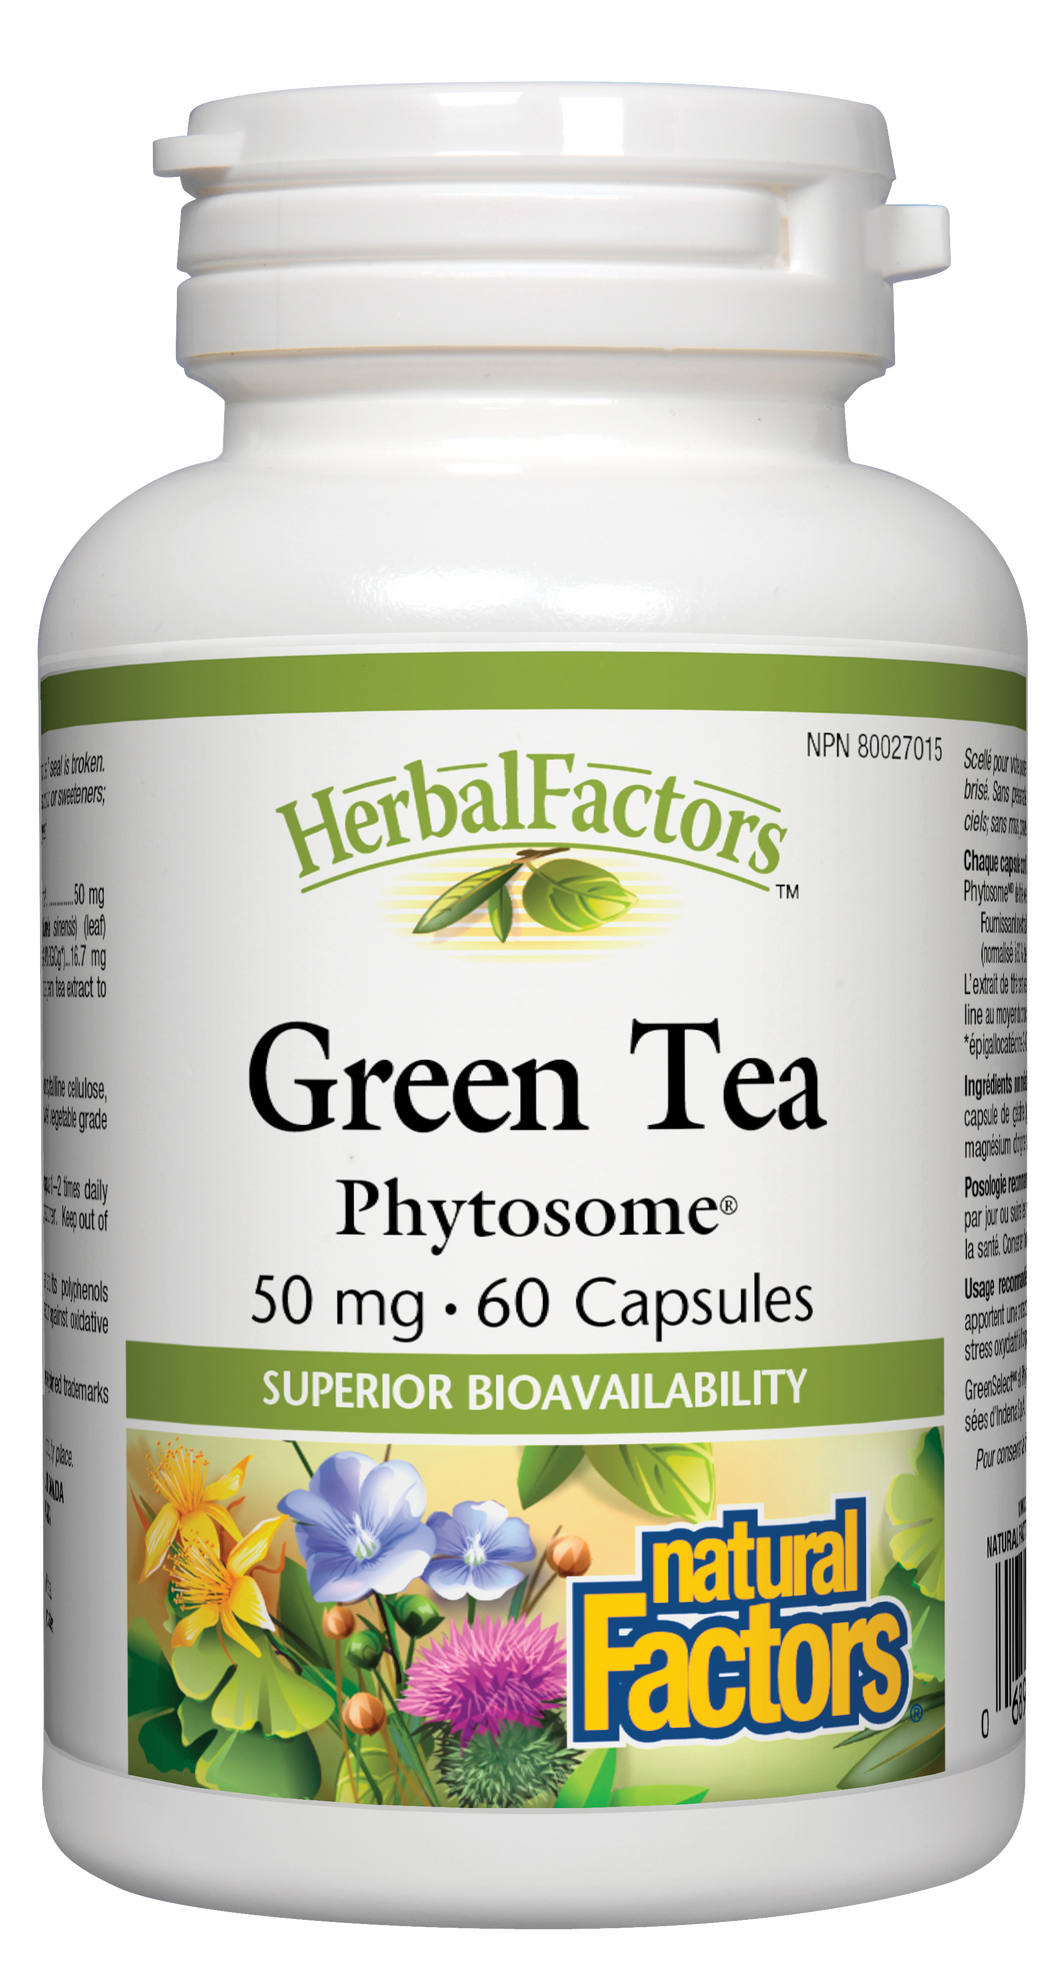 HerbalFactors Green Tea Phytosome provides a highly bioavailable form of green tea and its polyphenols, standardized to 60% catechins and 40% EGCg. This potent antioxidant helps protect the body against oxidative stress in the body and helps promote optimal health.